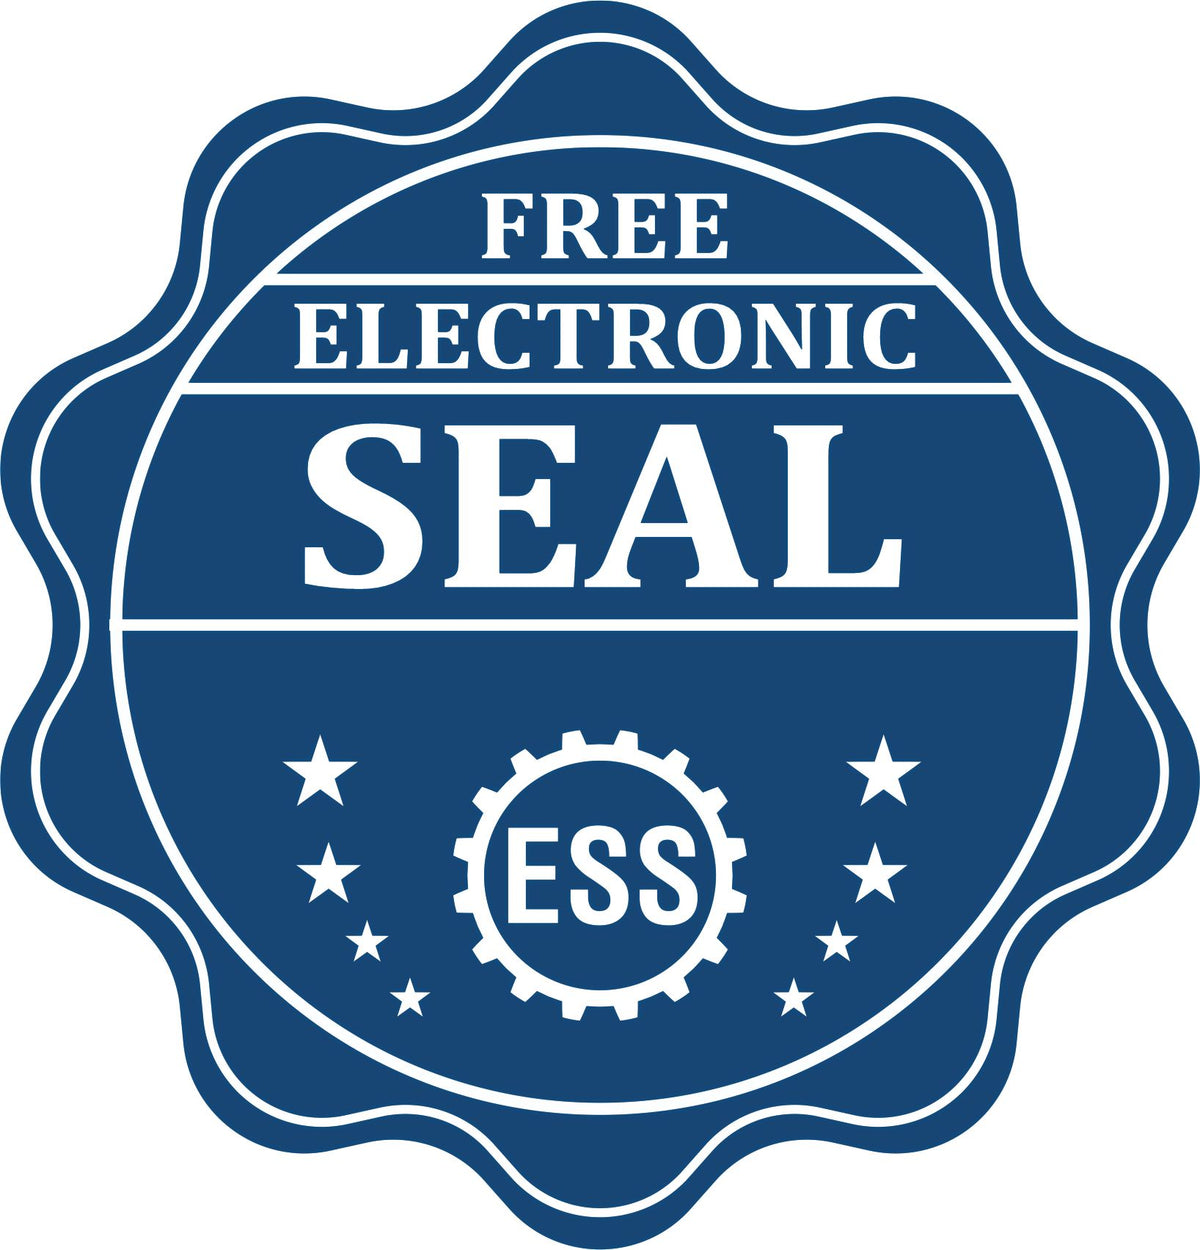 A badge showing a free electronic seal for the Heavy-Duty North Carolina Rectangular Notary Stamp with stars and the ESS gear on the emblem.